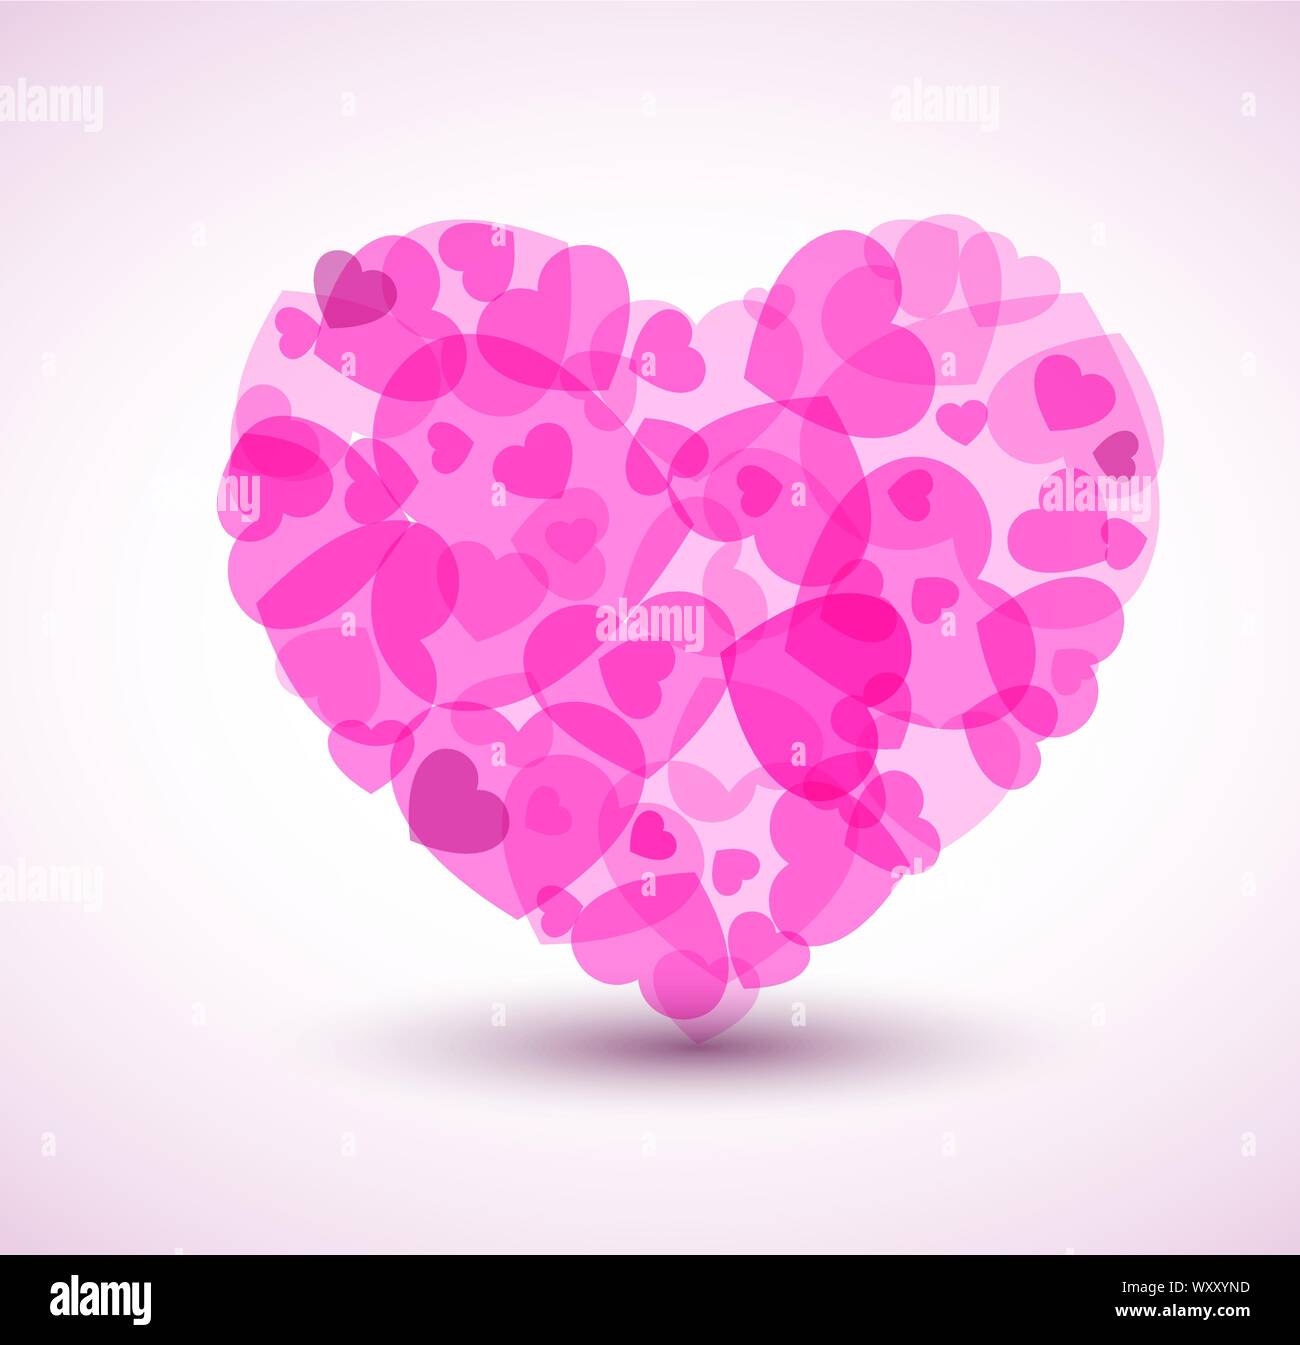 Heart Made Smaller High Resolution Stock Photography and Images - Alamy